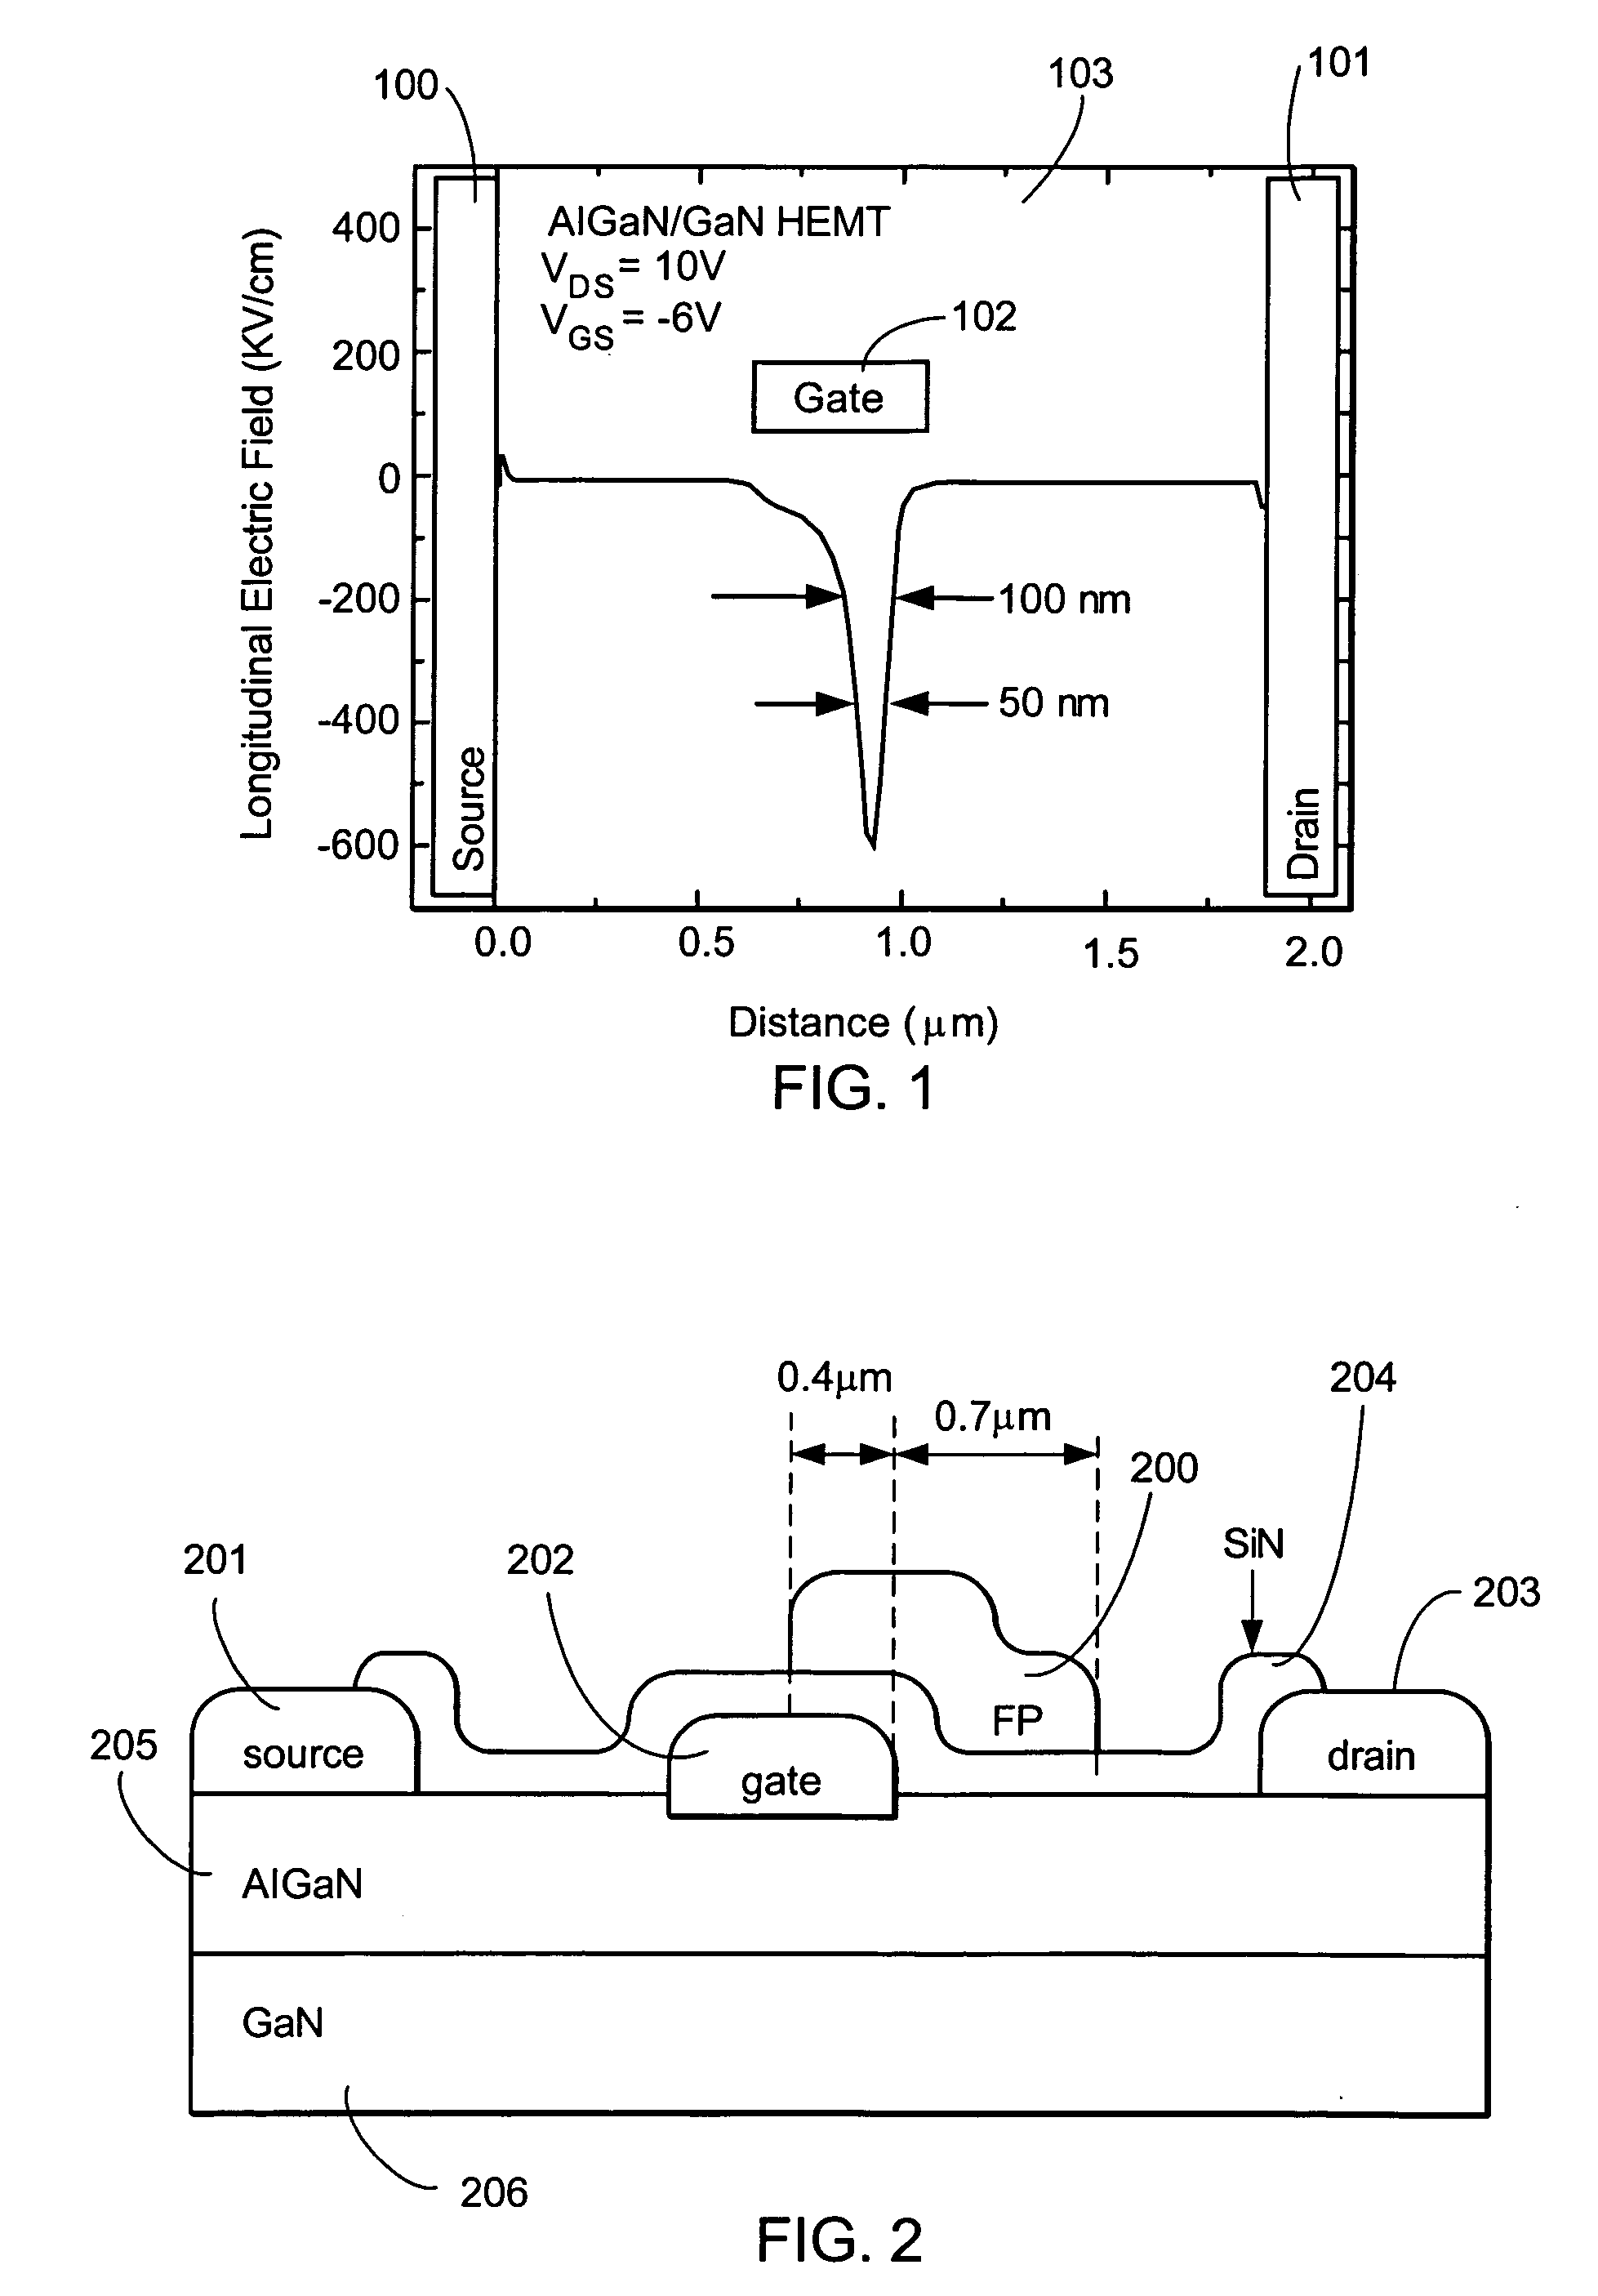 Methods to shape the electric field in electron devices, passivate dislocations and point defects, and enhance the luminescence efficiency of optical devices